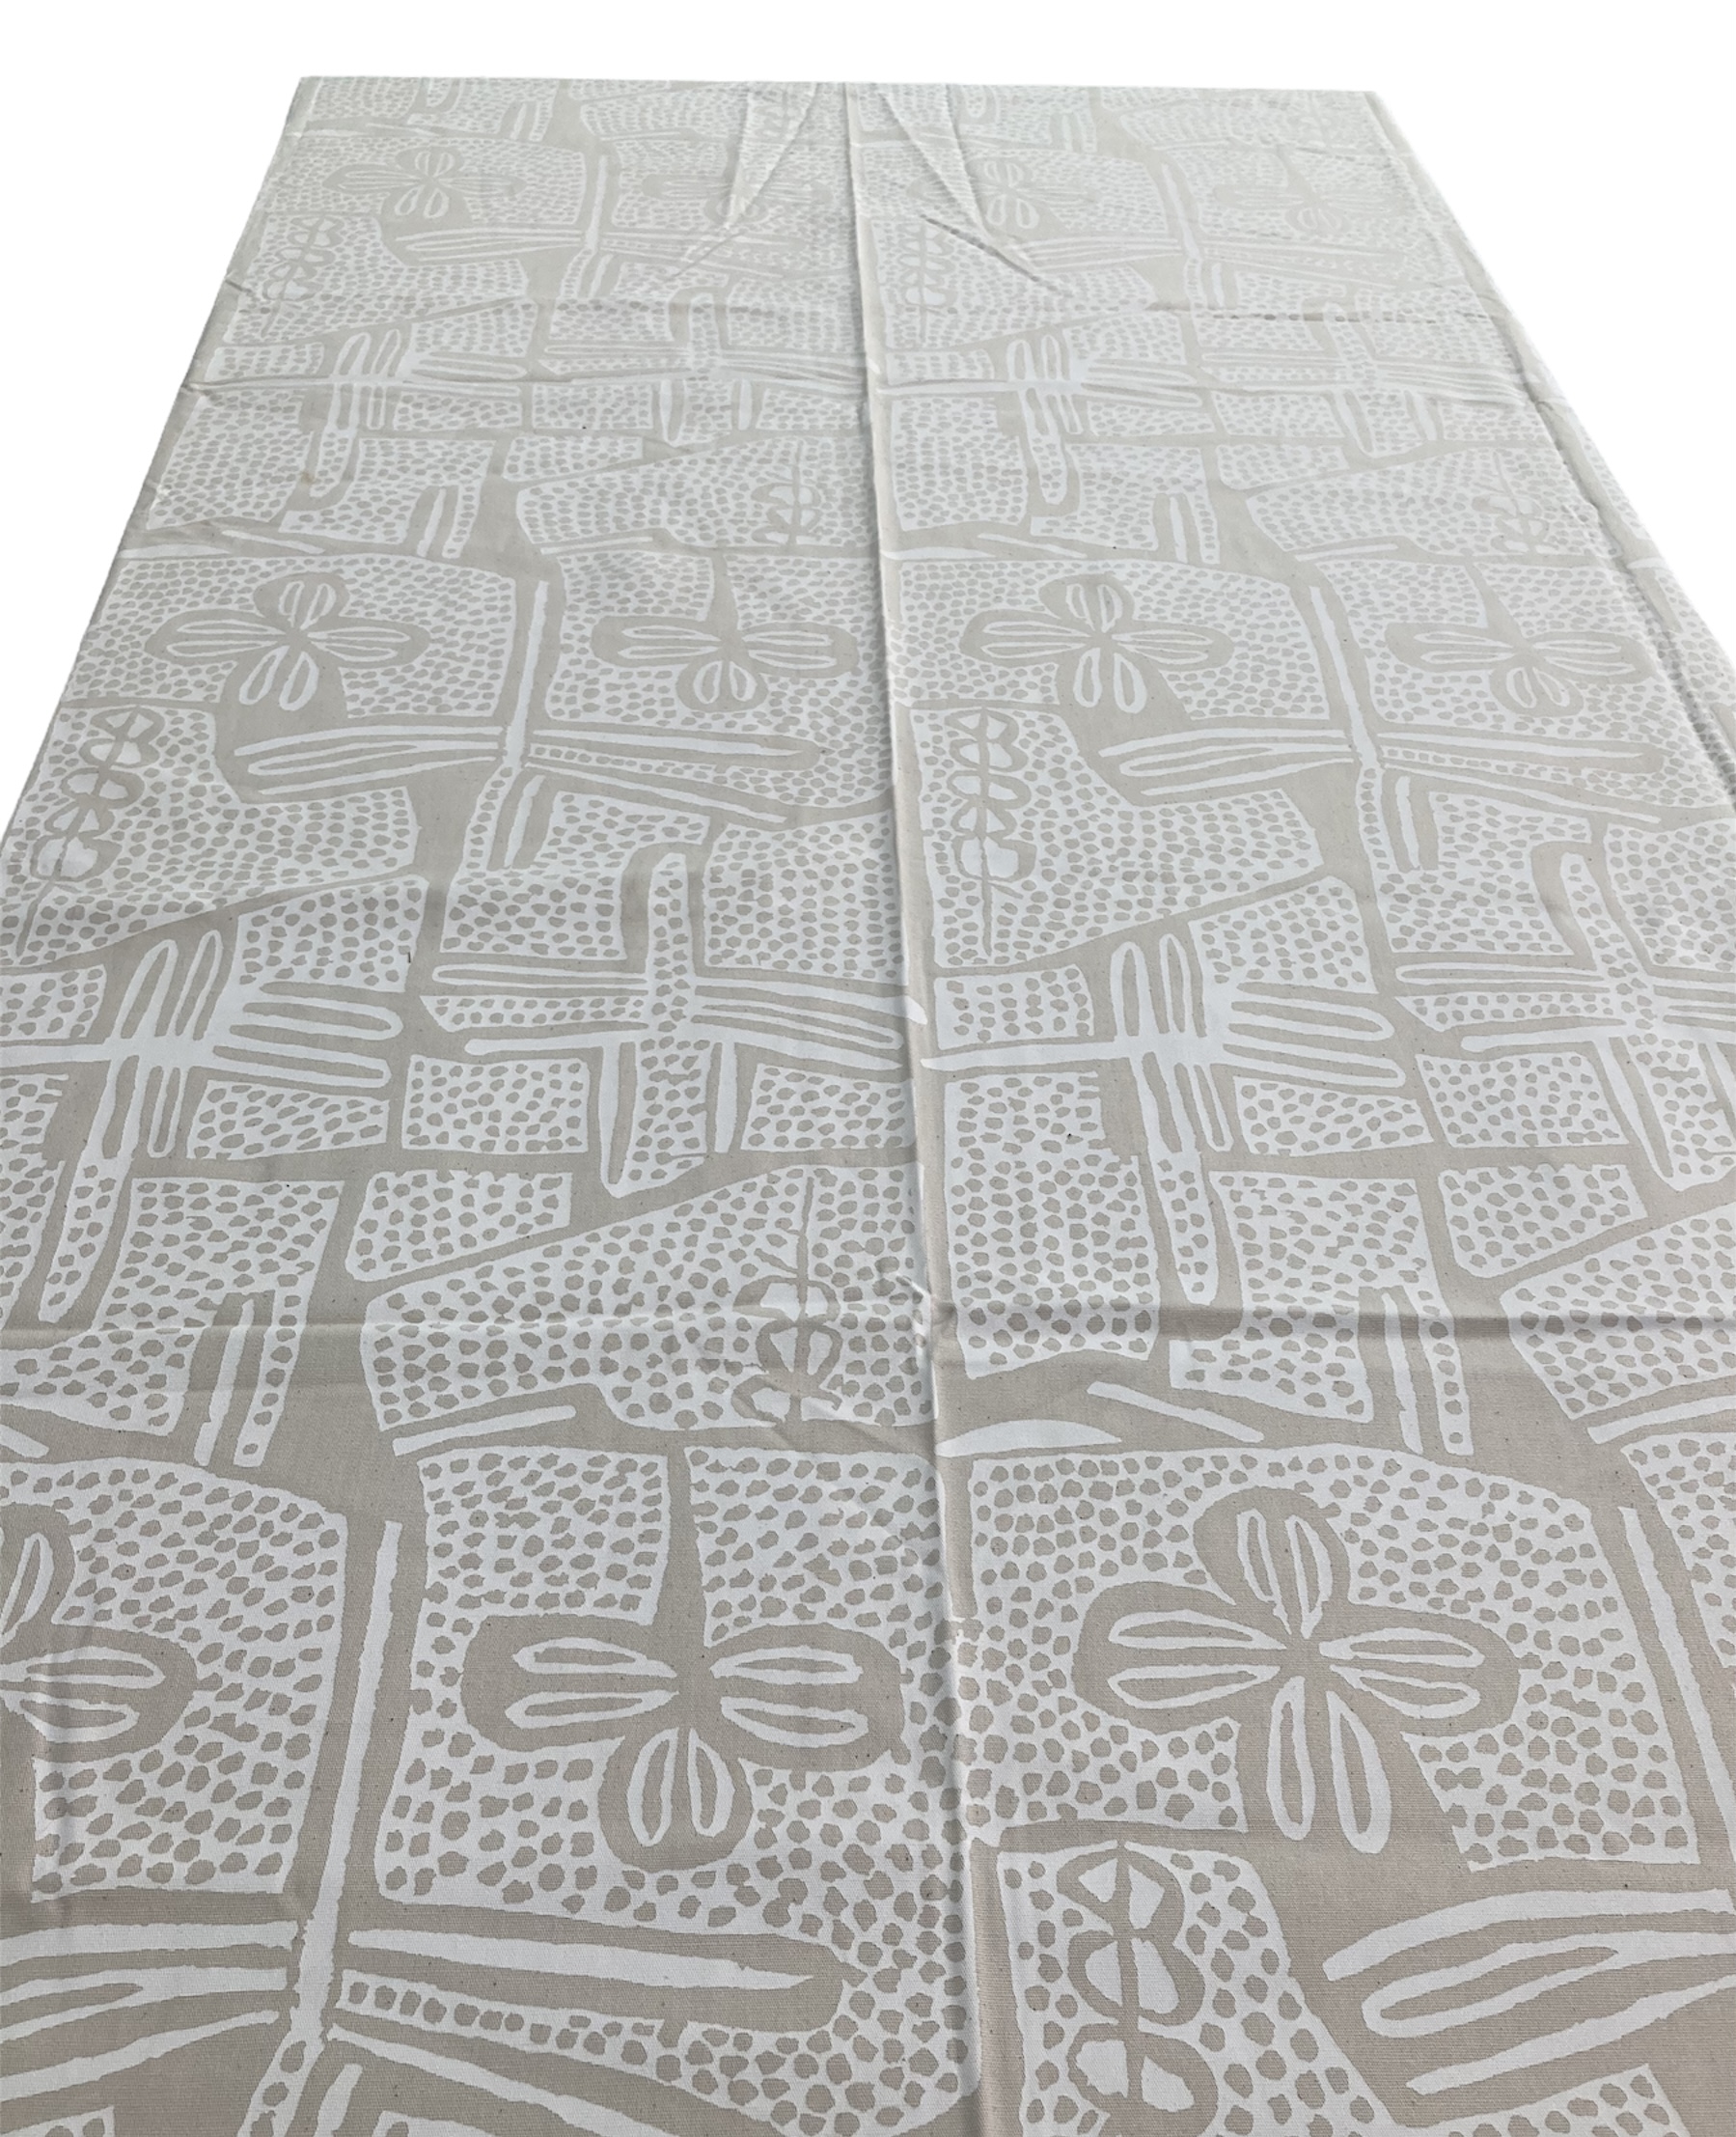 100% cotton Tablecloth approx. 79\" x 57\" from Namibia - # b14t